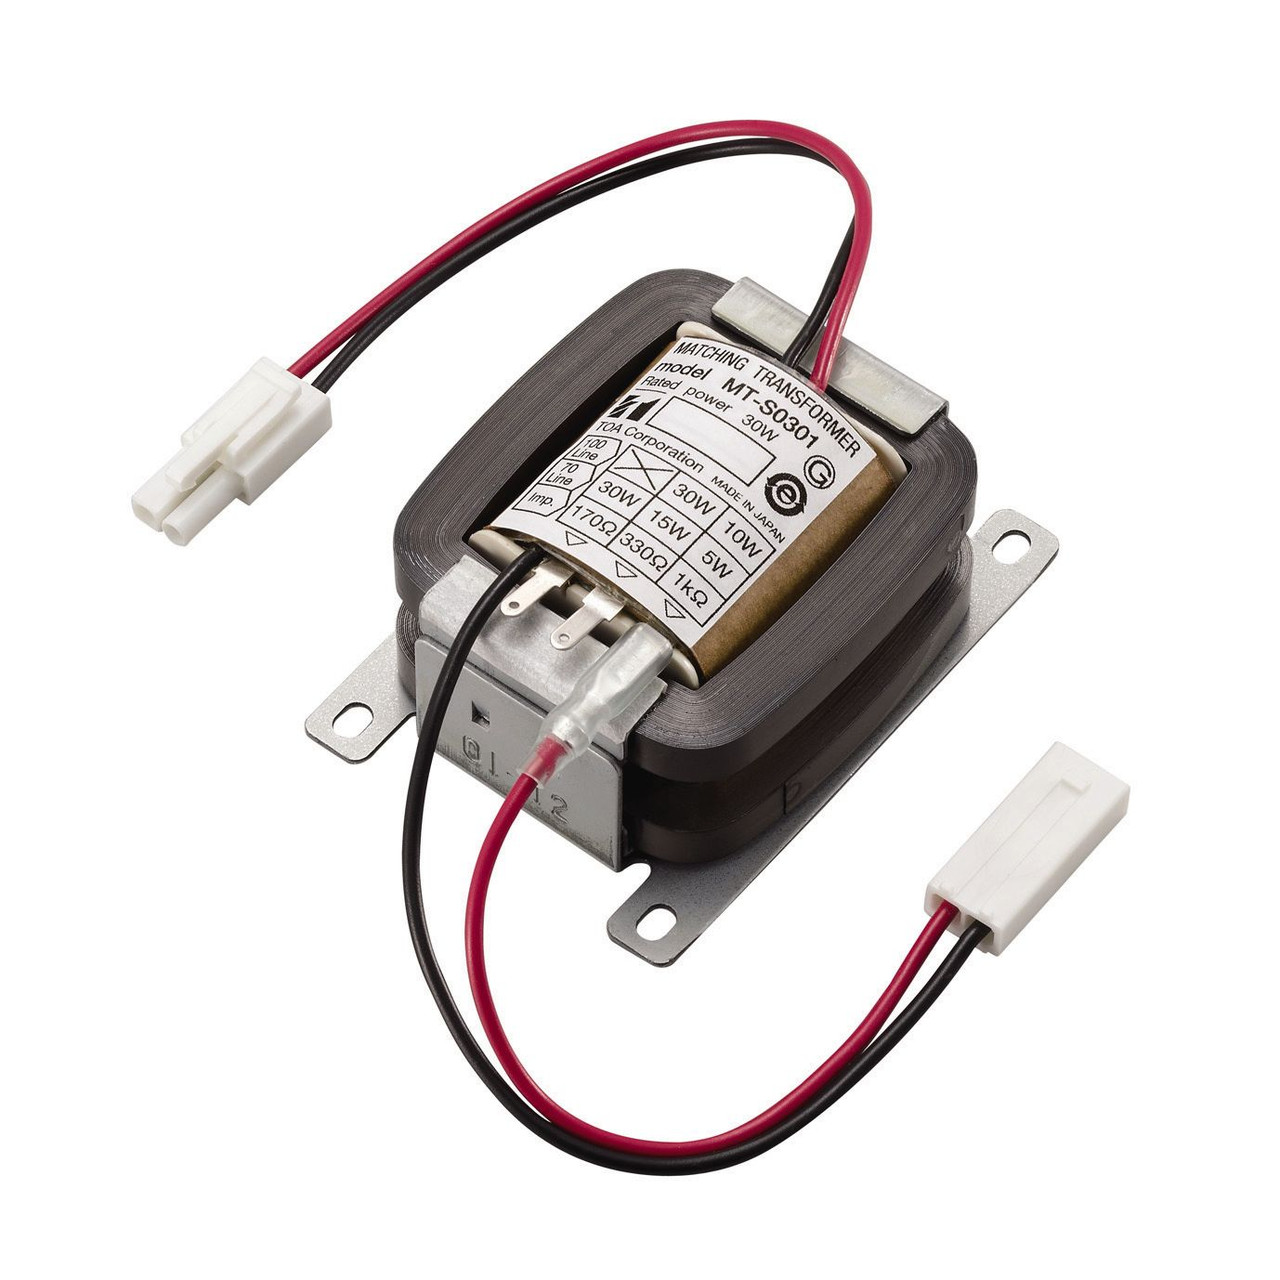 TOA MT-S0301 Matching Transformer For High-Impedance Operation